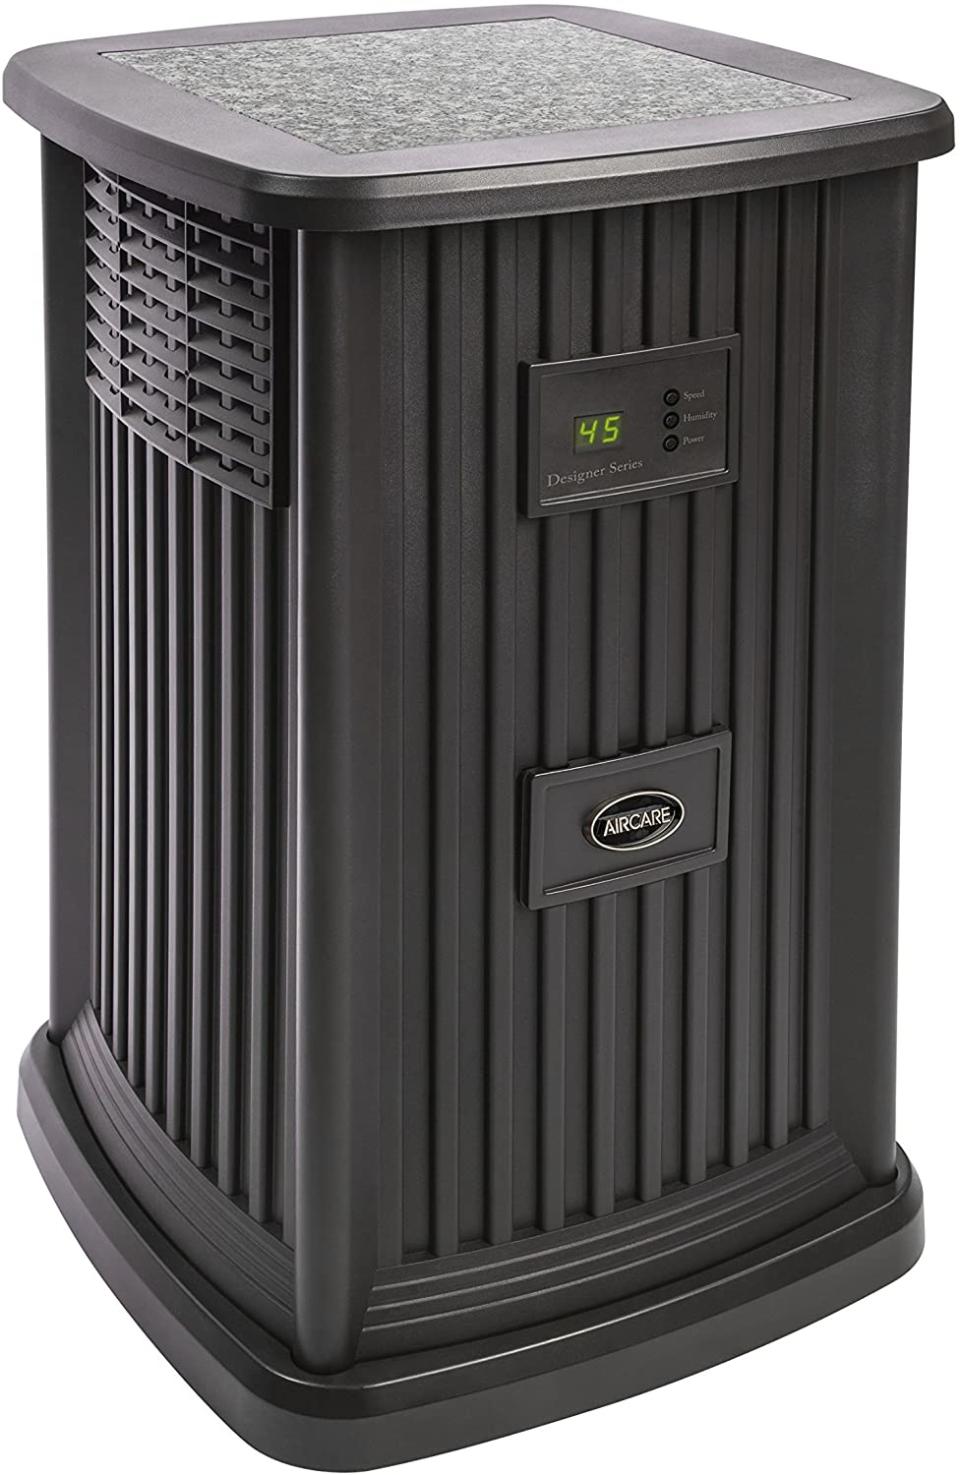 best whole house humidifier aircare ep9 800